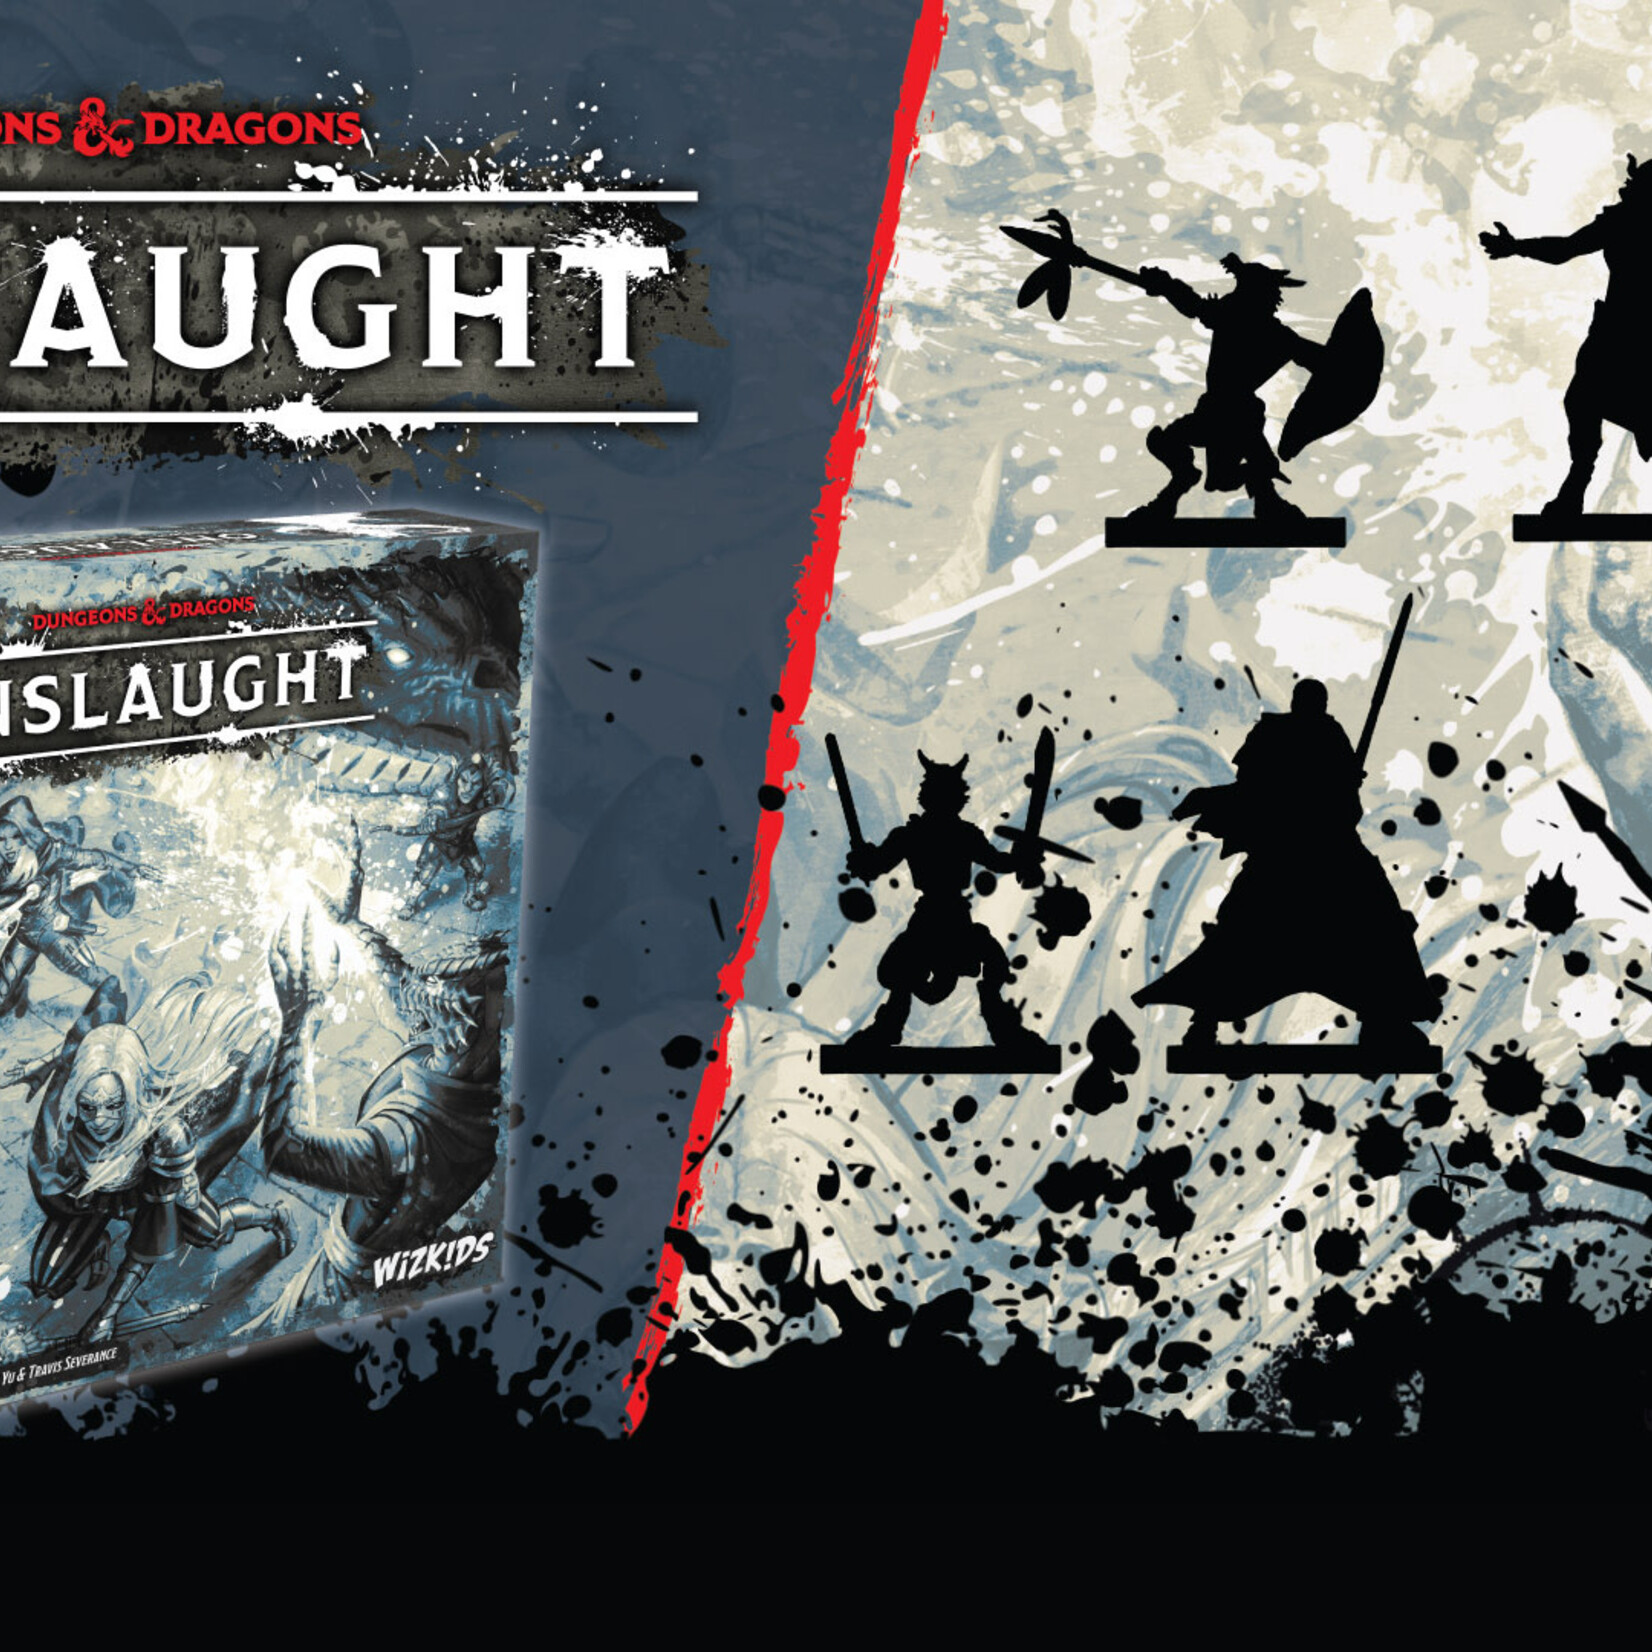 Wizards of the Coast Dungeons & Dragons: Onslaught - Core Set